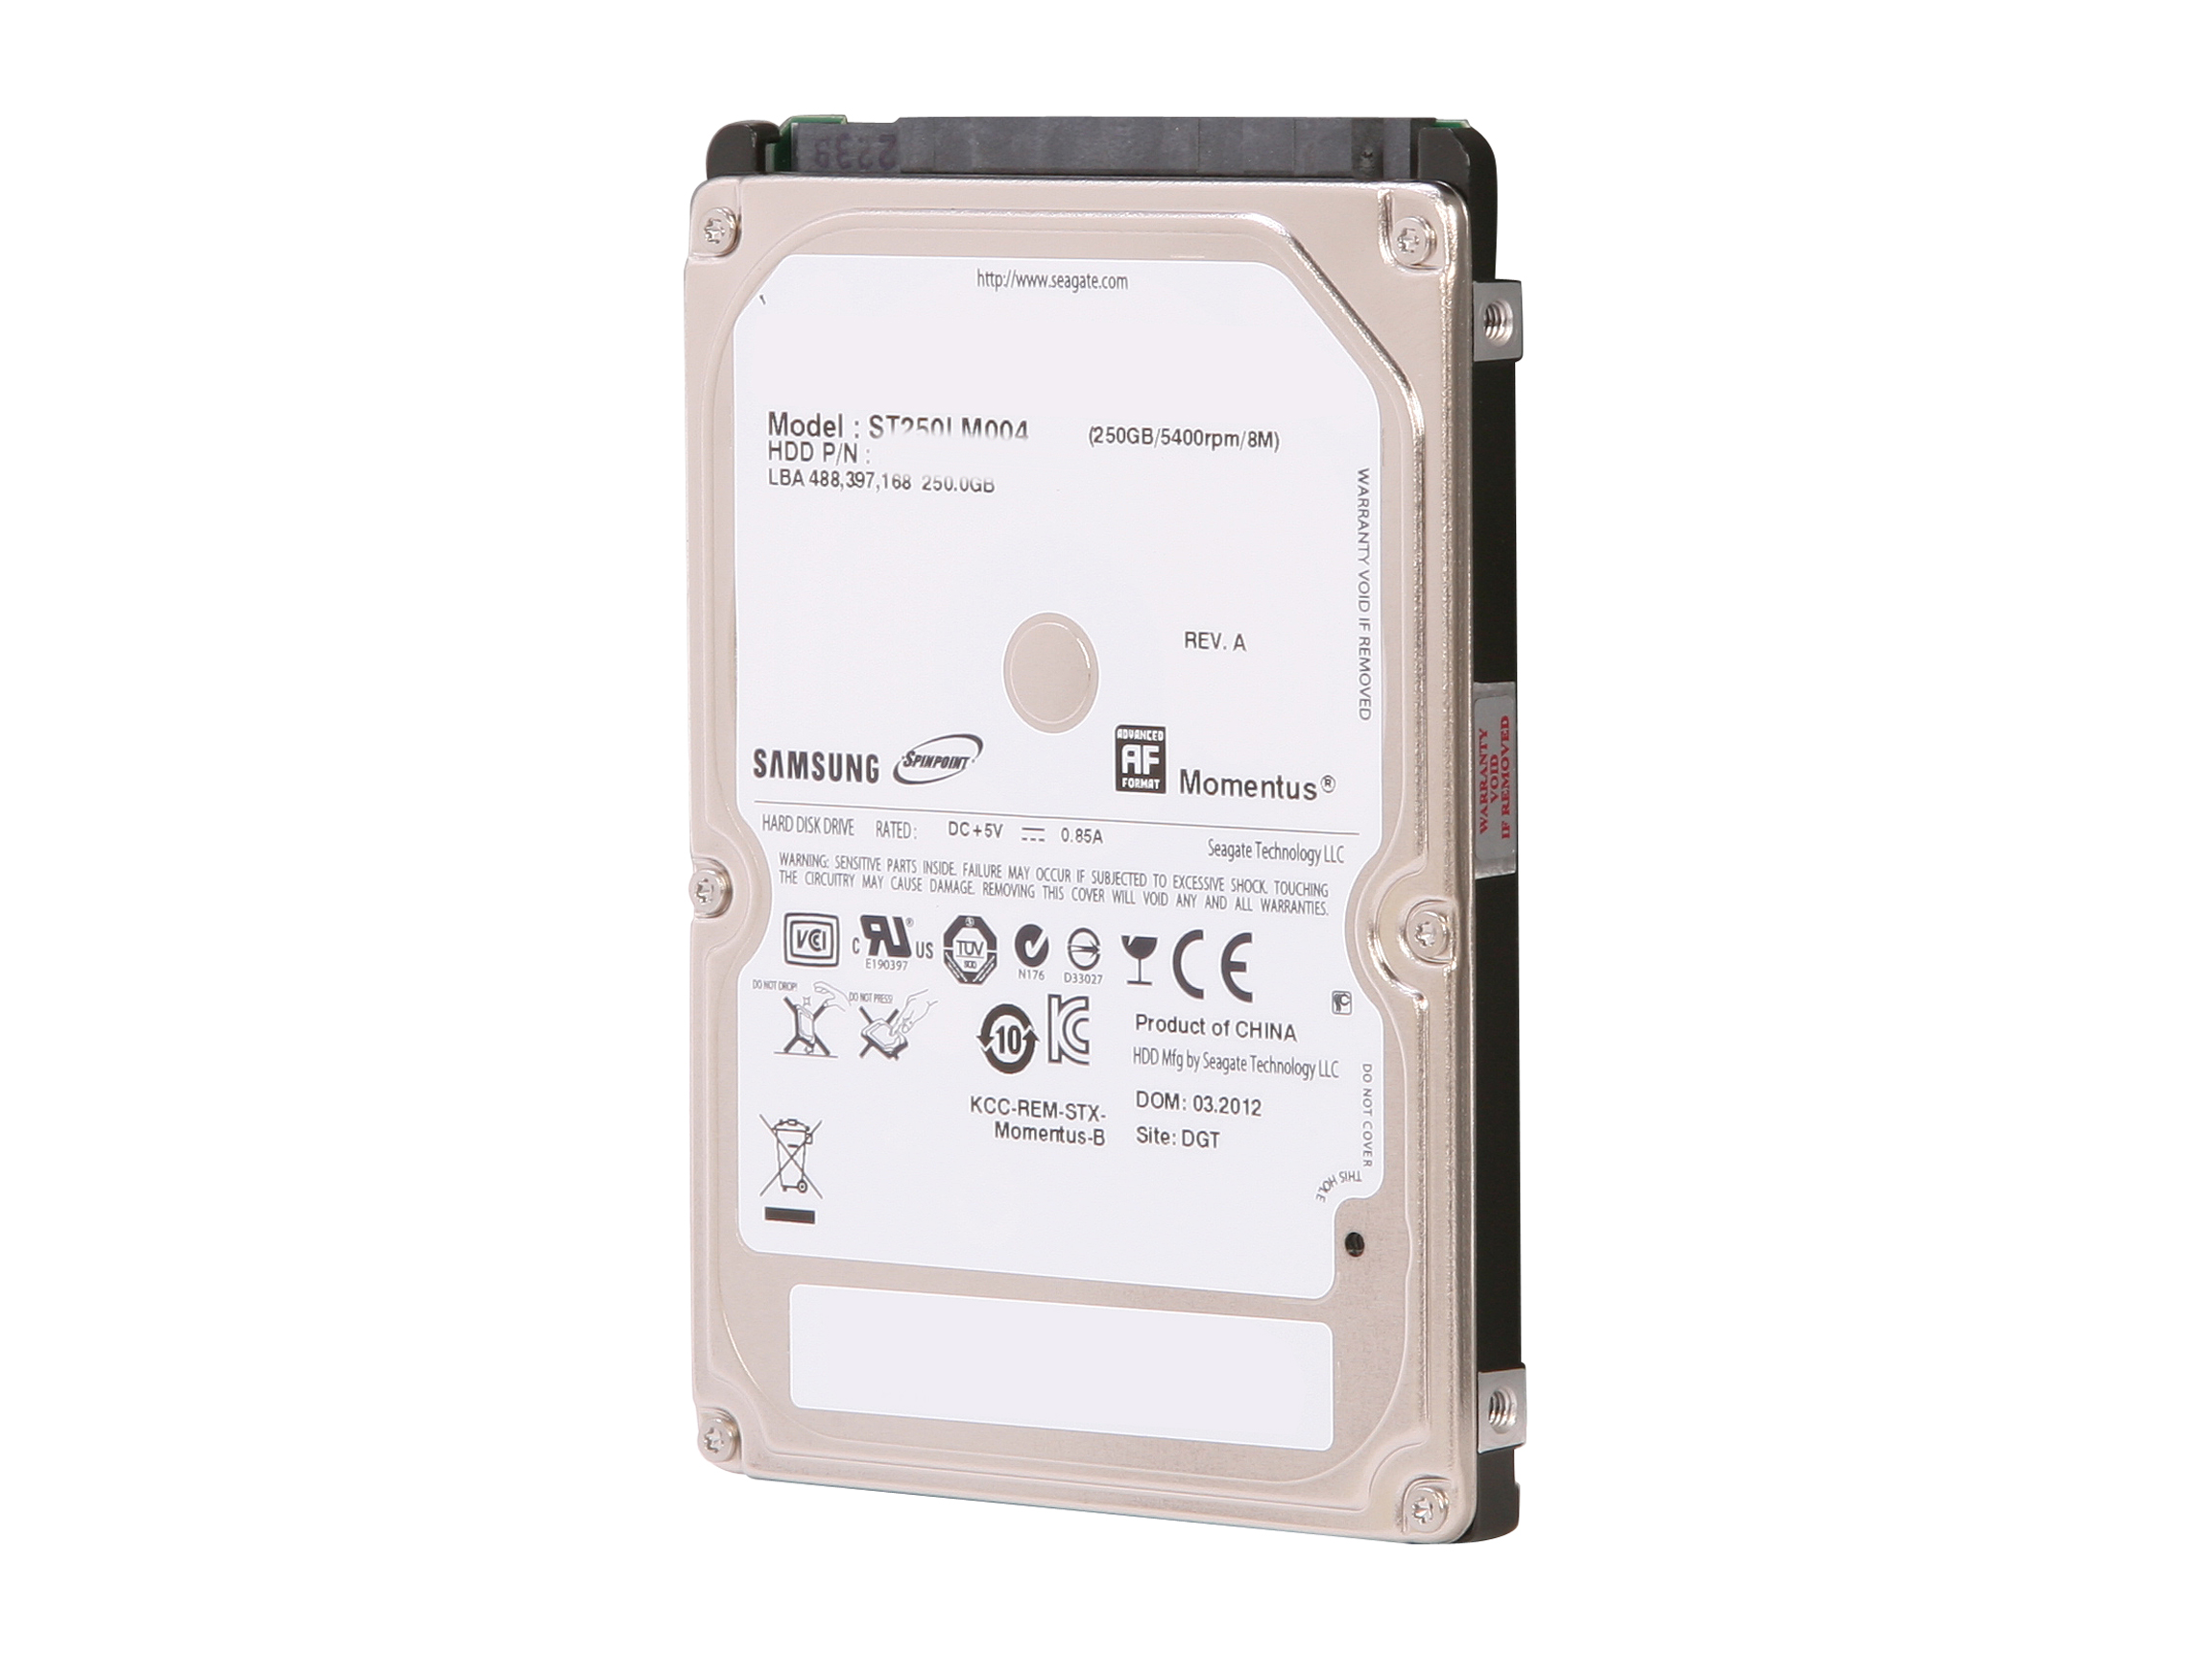 SAMSUNG Spinpoint M8 ST250LM004 250GB 5400 RPM 8MB Cache SATA 3.0Gb/s 2.5" Internal Notebook Hard Drive Bare Drive